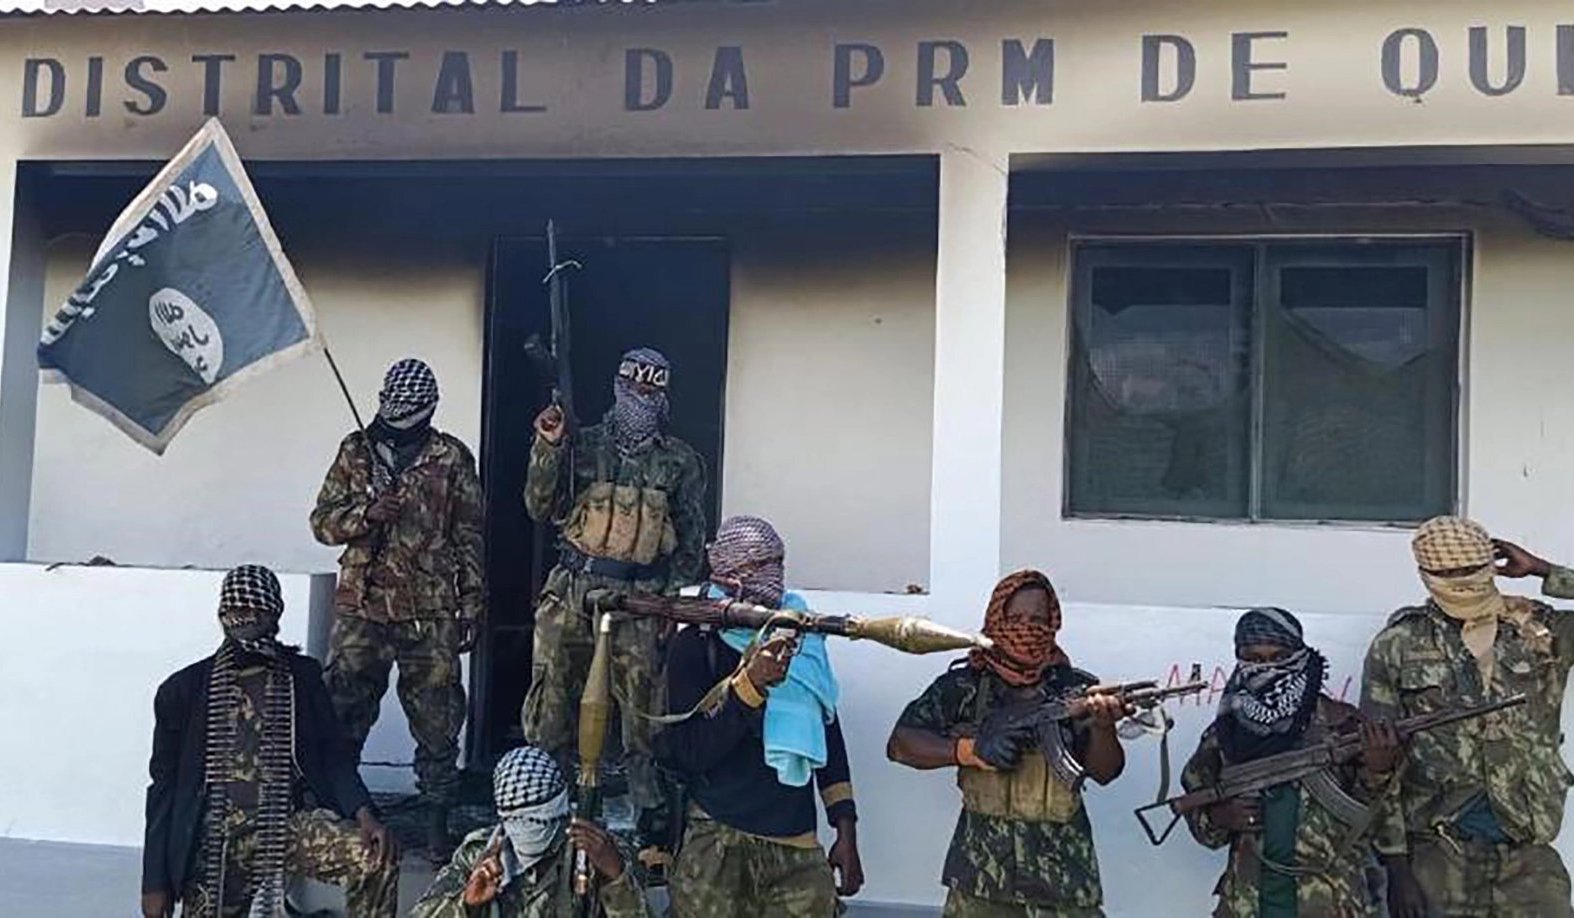 Militants carrying the ISIS flag in Mozambique’s northern province of Cabo Delgado. Photo via Defense News of Nigeria on Twitter.